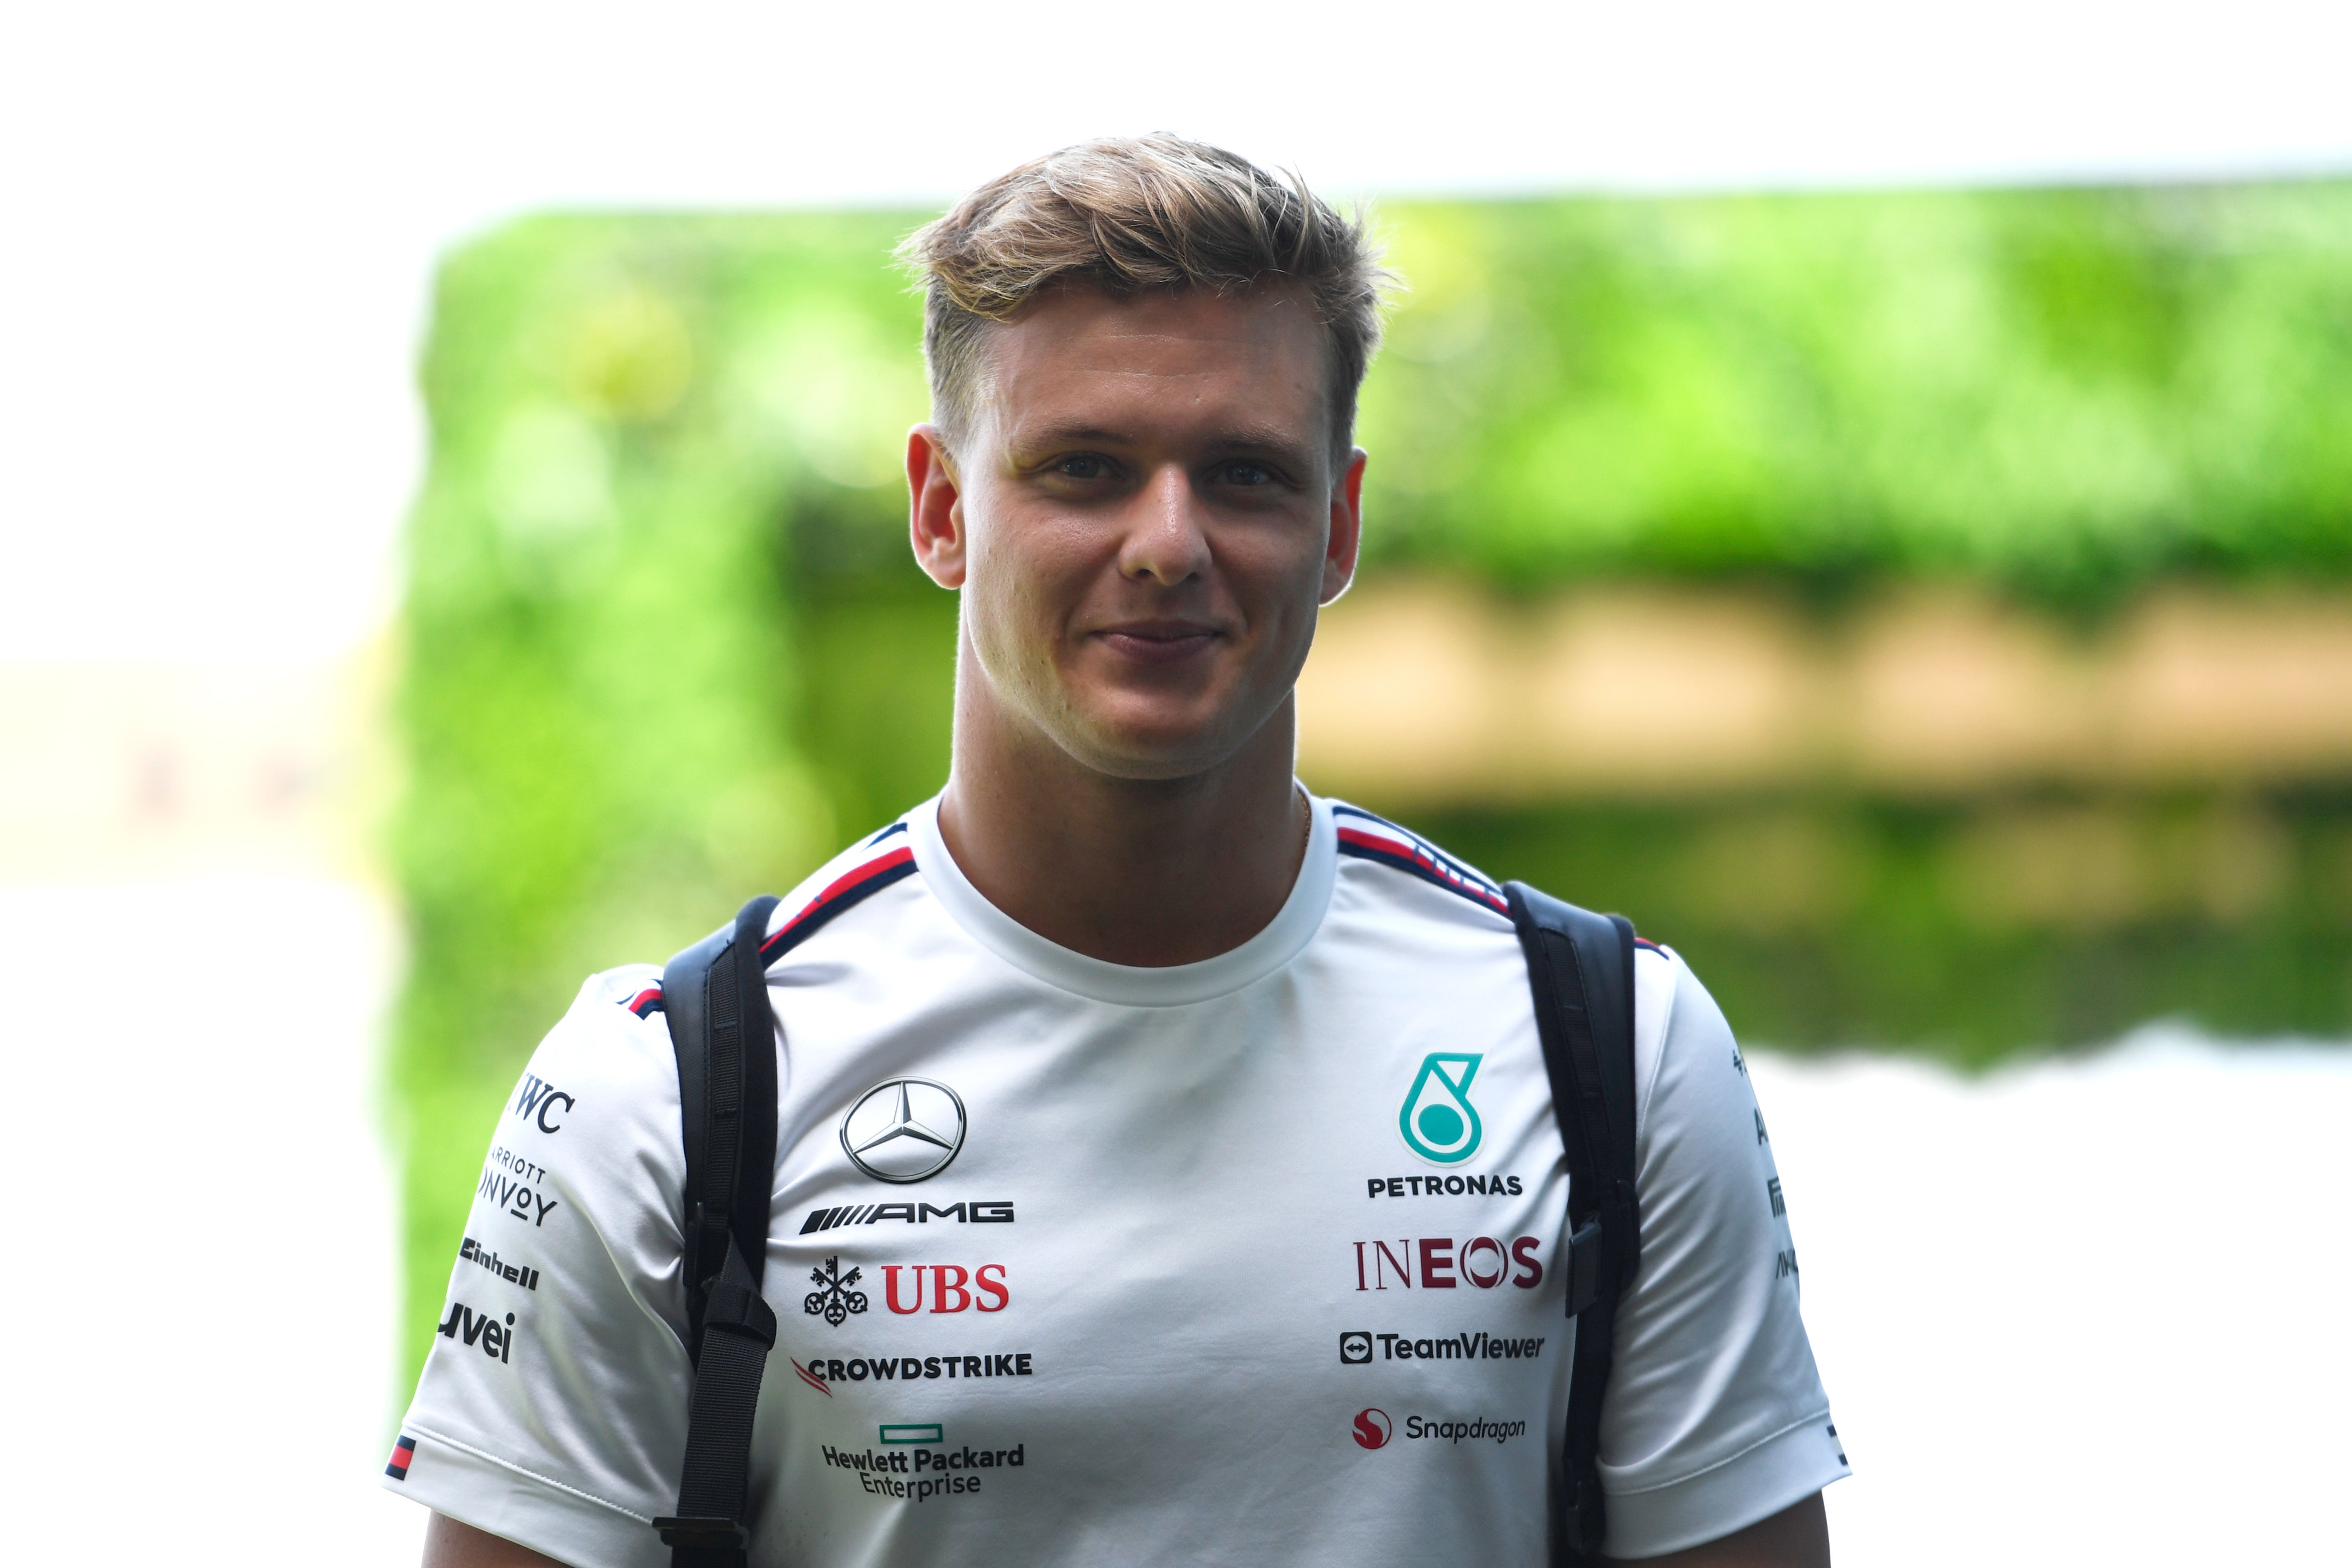 Mick Schumacher will appear at the Goodwood Festival of Speed this year